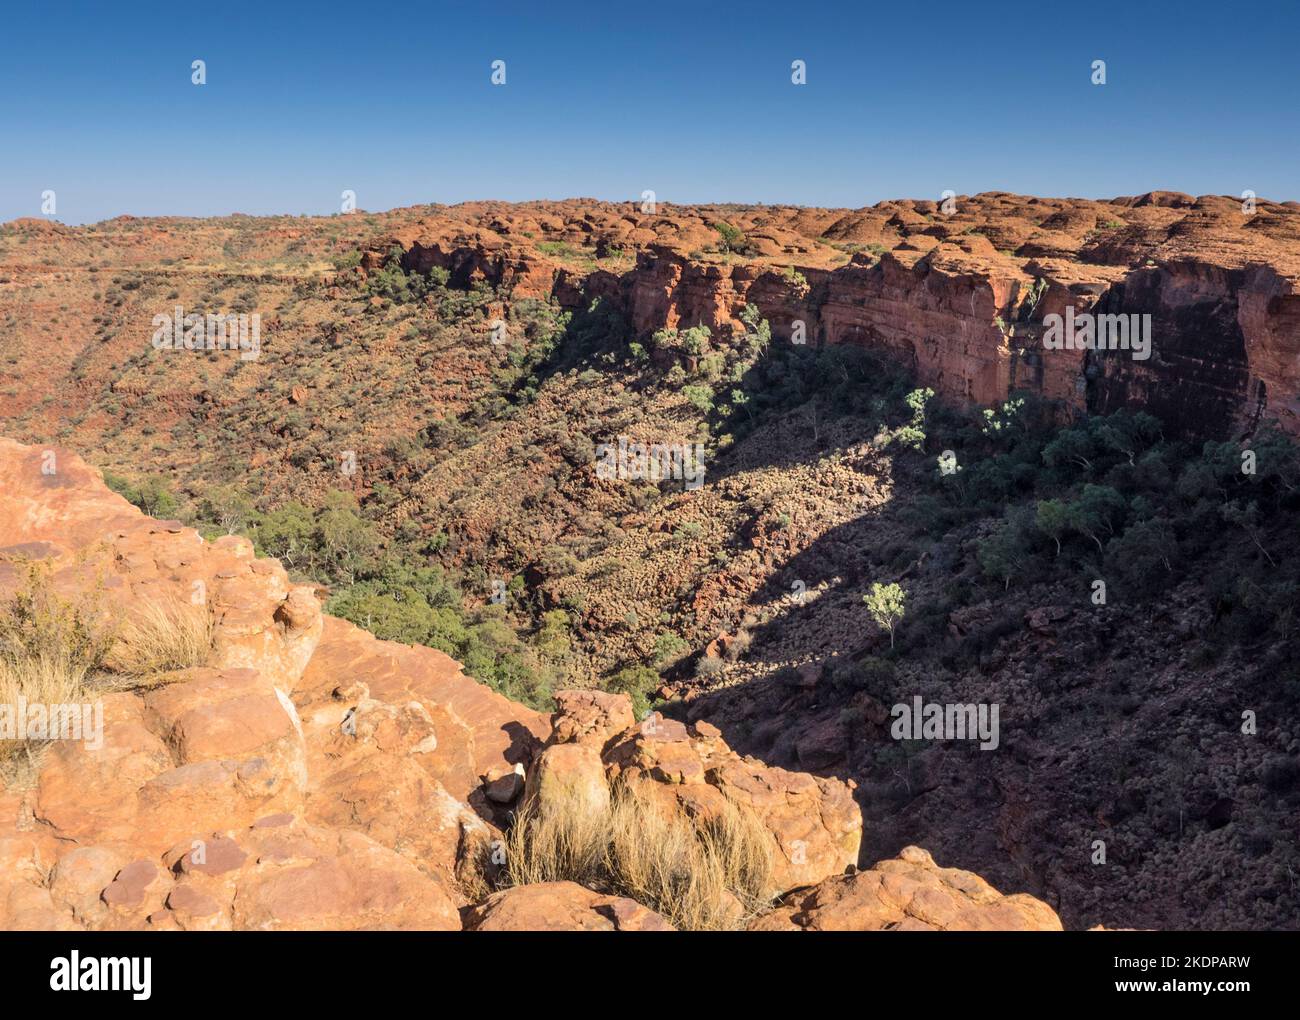 Kings Canyon from the South Wall of The Rim Walk, Watarrka National Park, Northern Territory, Australia Stock Photo